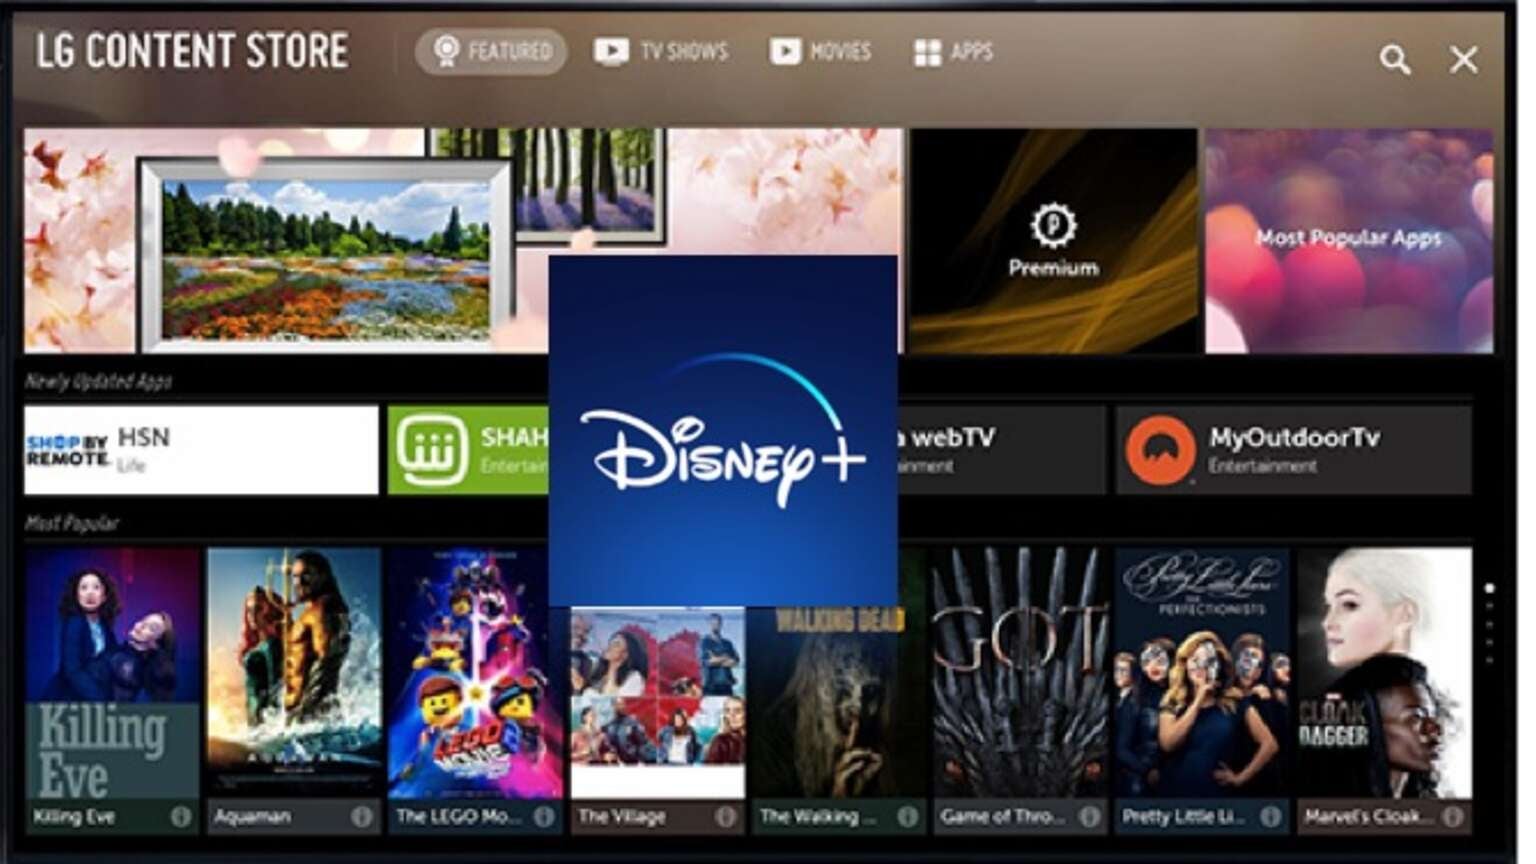 How To Download and Sign Up For Disney Plus on LG Smart TV in Australia - How To Add Disney Plus To Lg Smart Tv